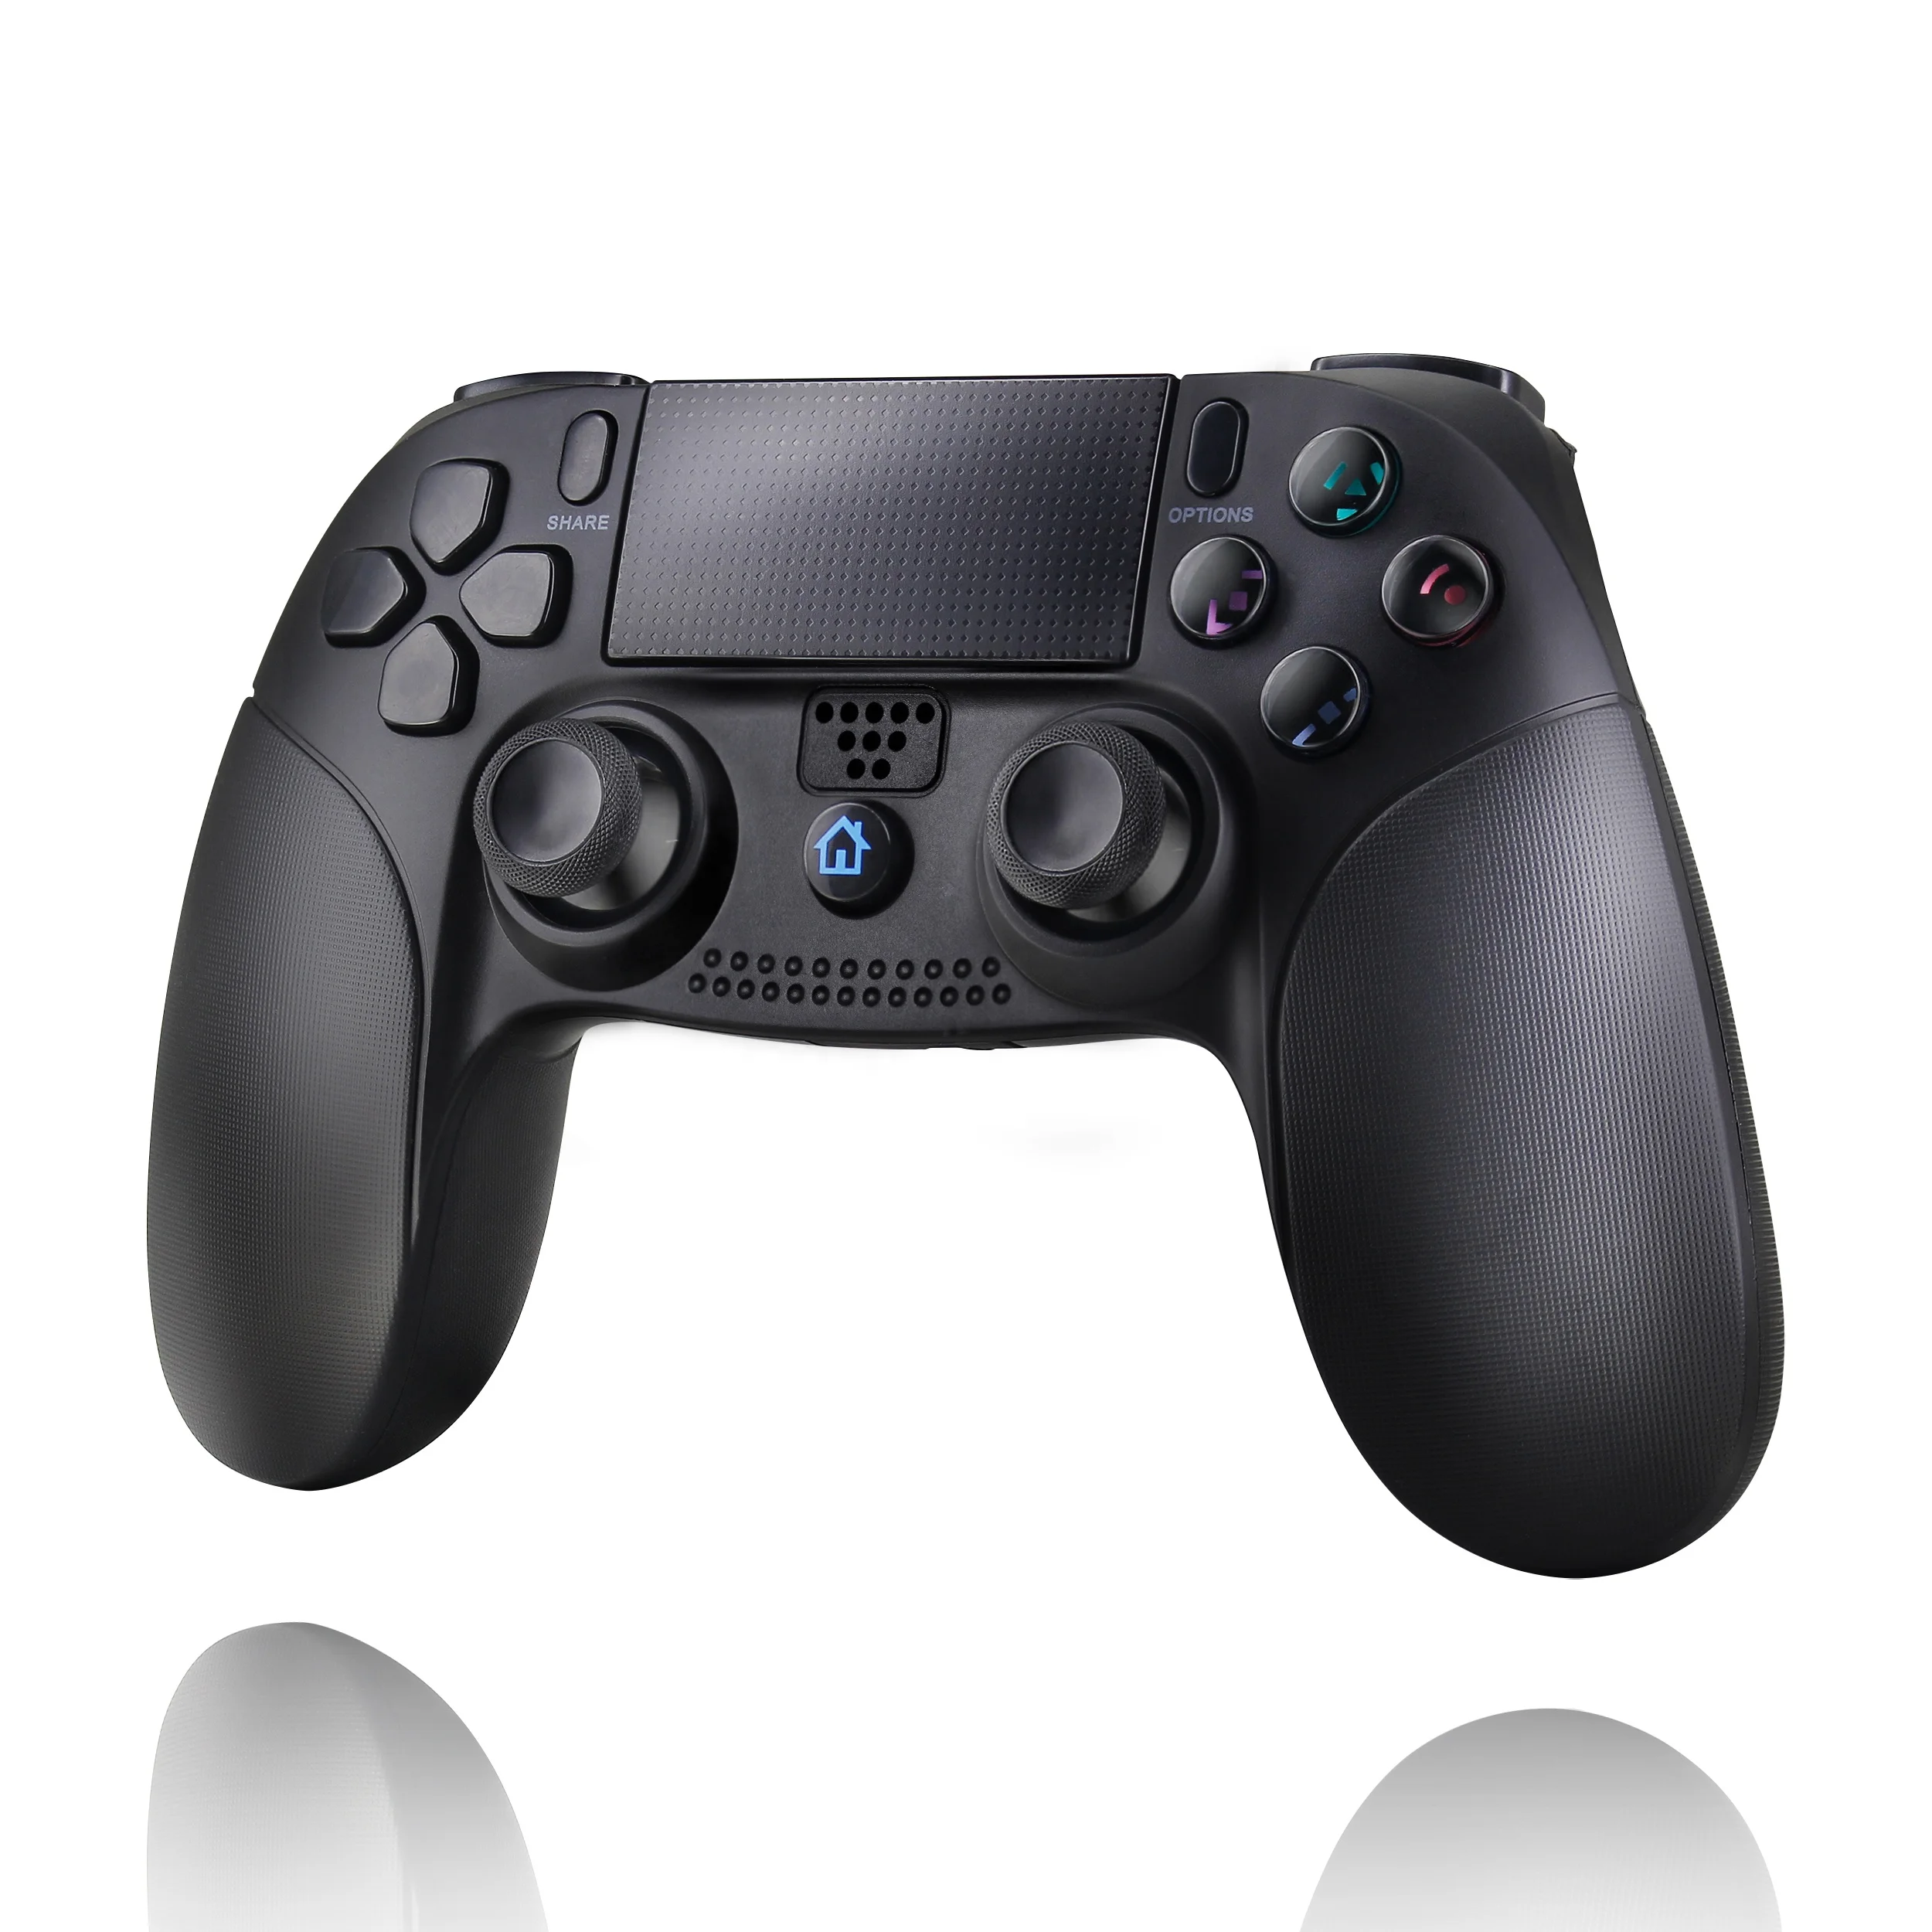 Wireless Controller,Black Game Controller For Ps4/slim/pro Six-axis Gyroscope Function For Ps4/ps3 Game Console Buy Black Game Controller For Ps4/slim/pro,Joystick With Six Axis Gyro Function,Joystick Controller For Ps4/ps3 Game